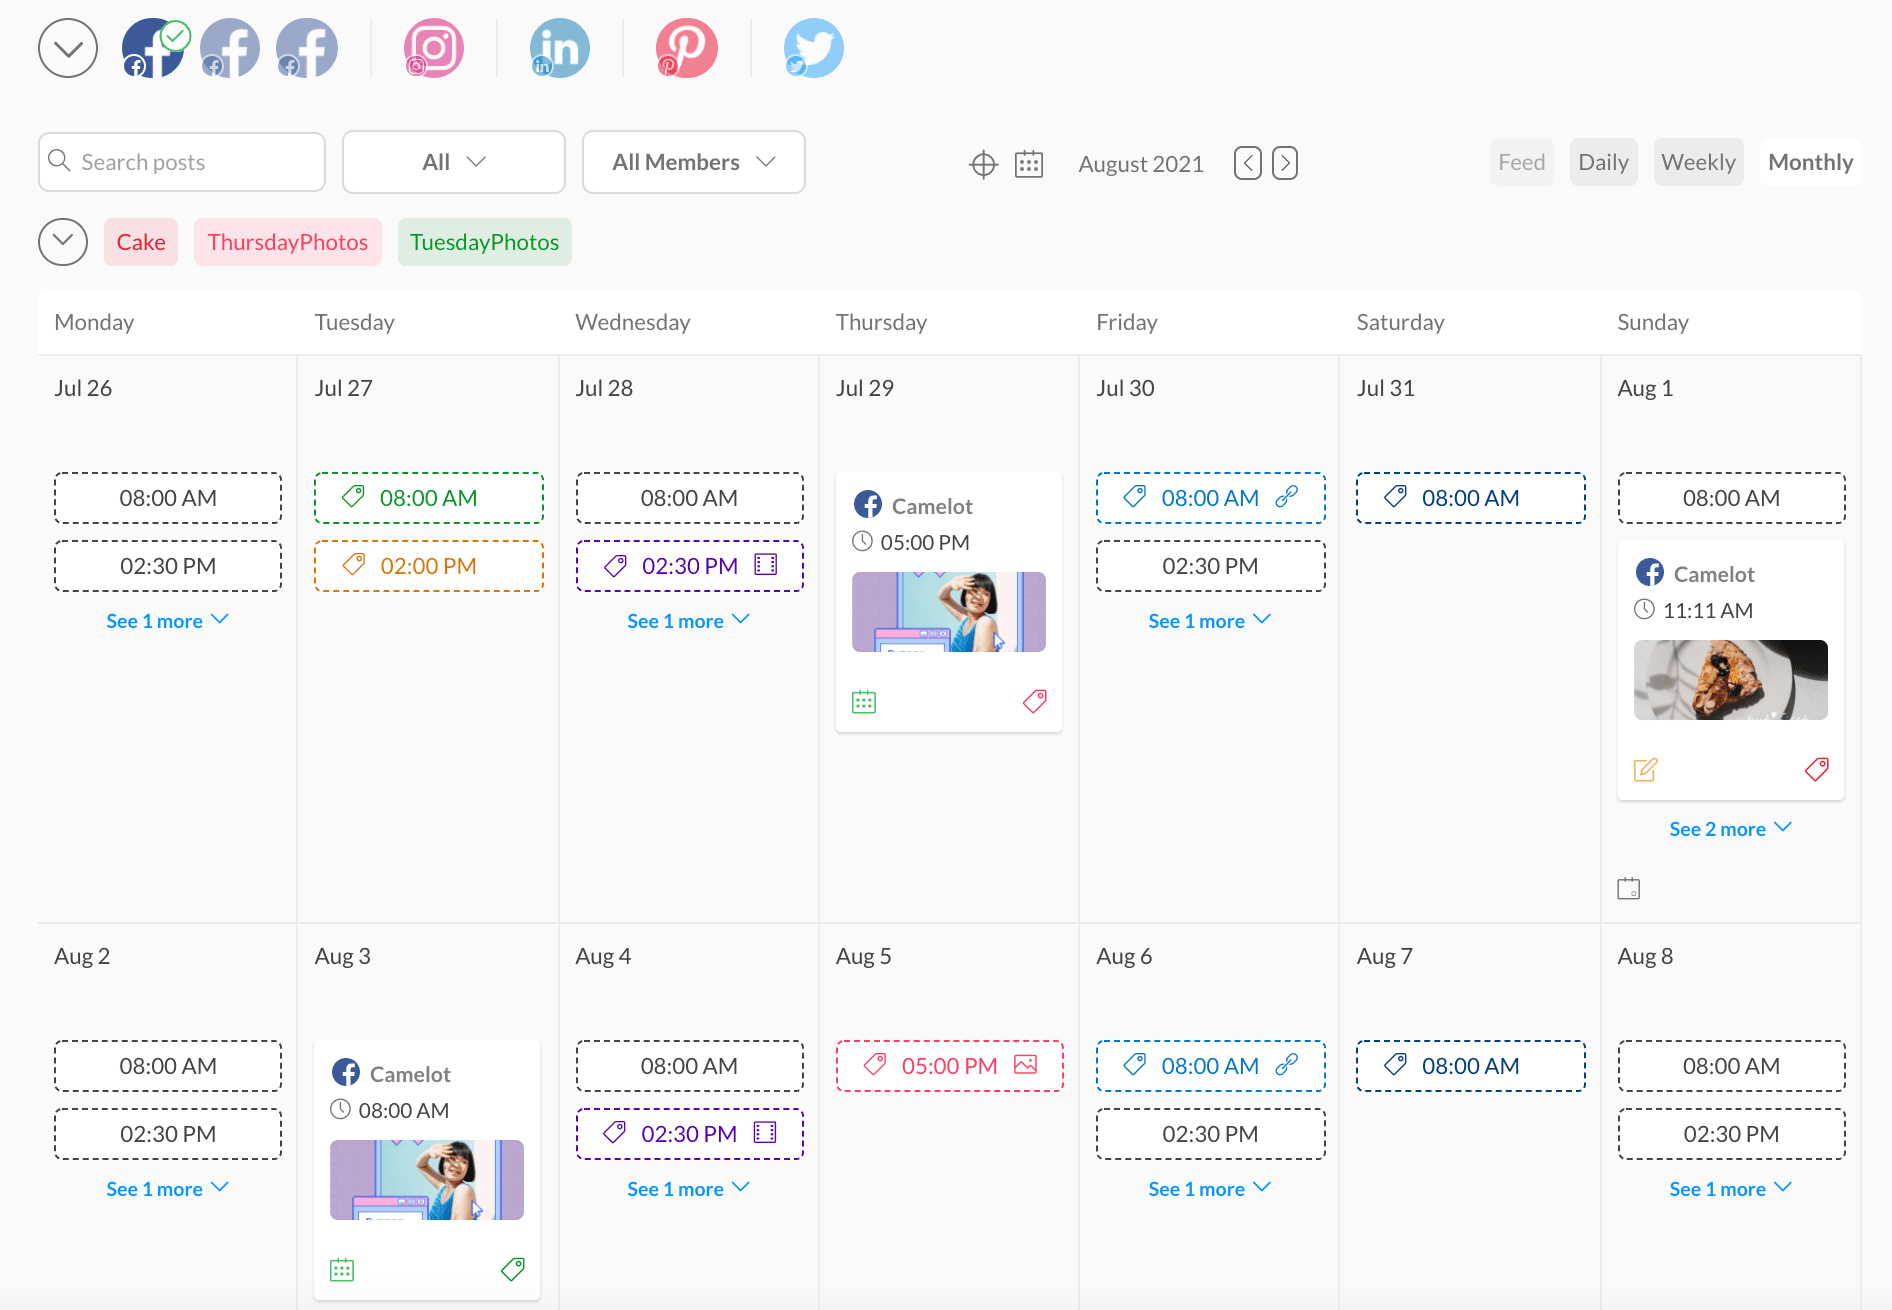 View and schedule new posts directly from a visual calendar